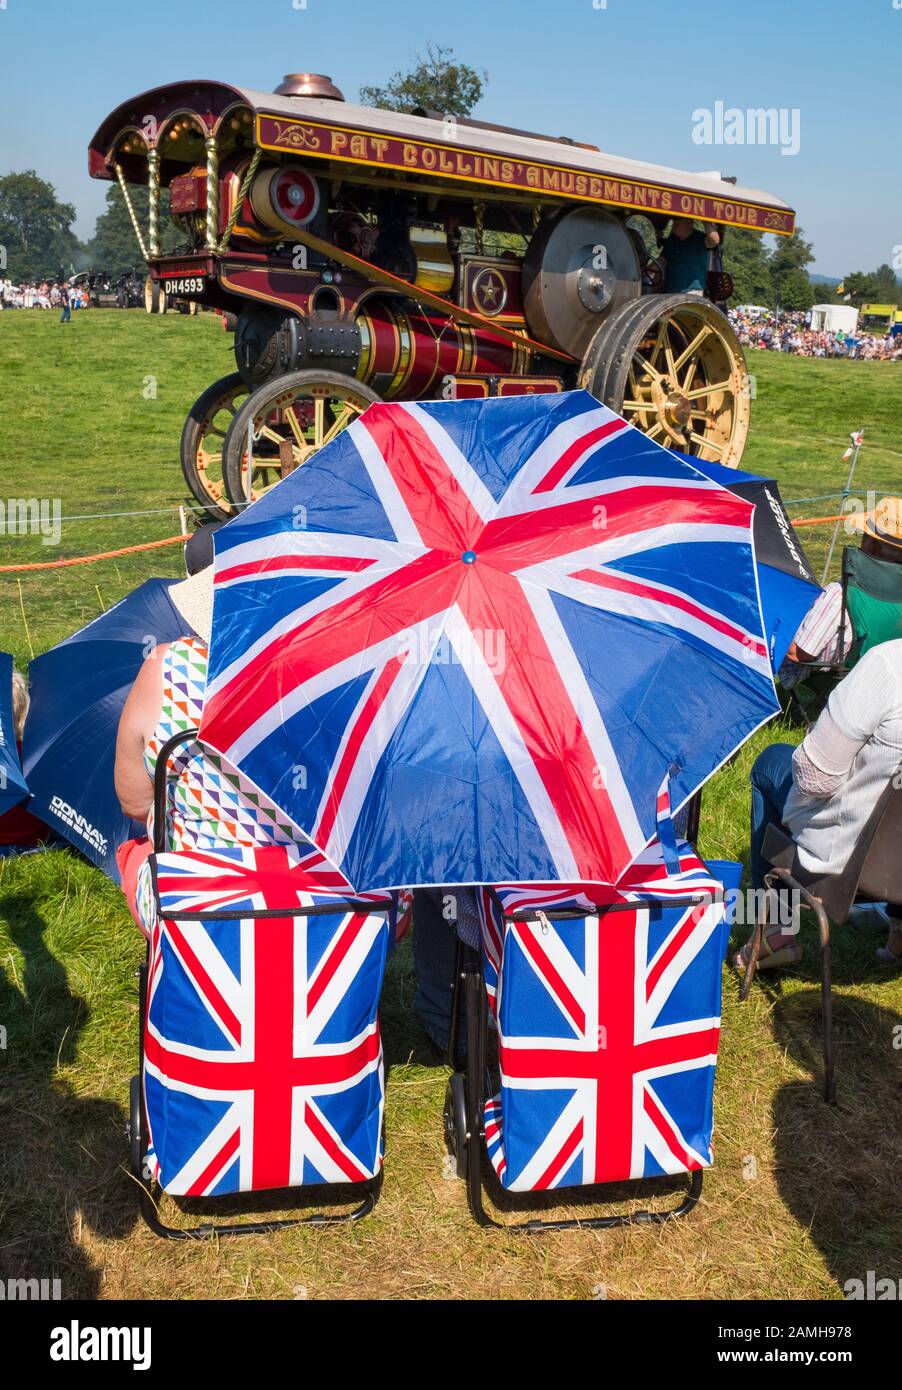 Spectators with a union flag umbrella watch a parade of traction engines at 2019 Shrewsbury Steam Rally, Shropshire, England, UK Stock Photo